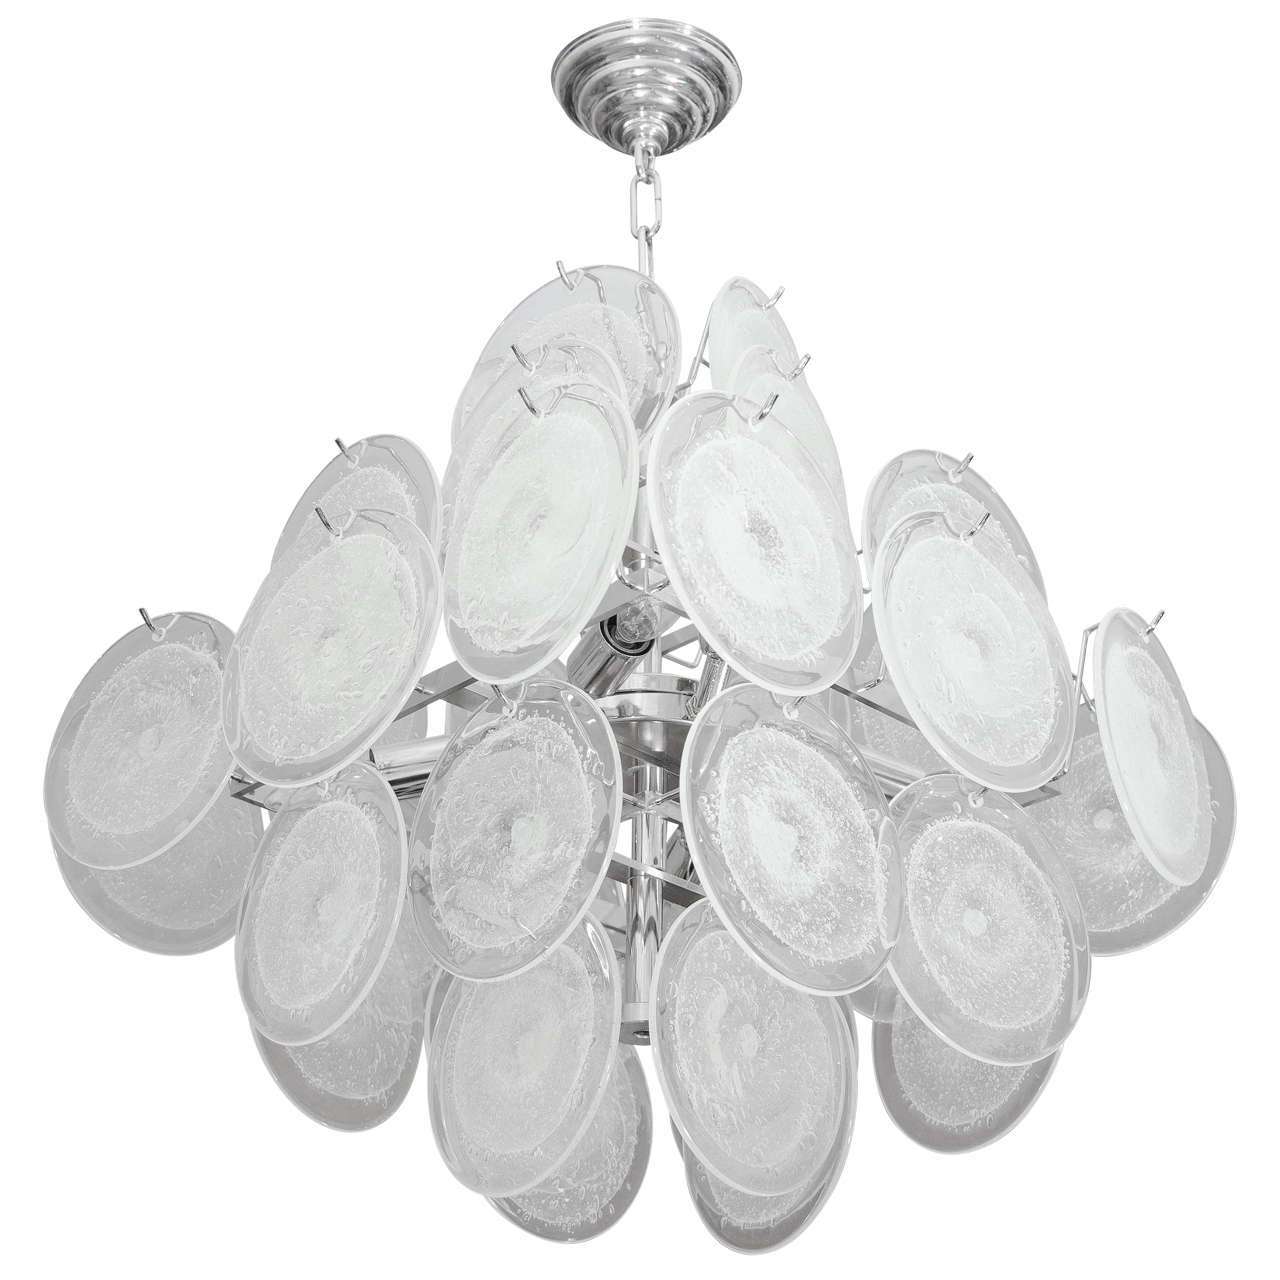 Custom Clear Bubble Murano Glass Disc Chandelier in Double Pyramid Shape